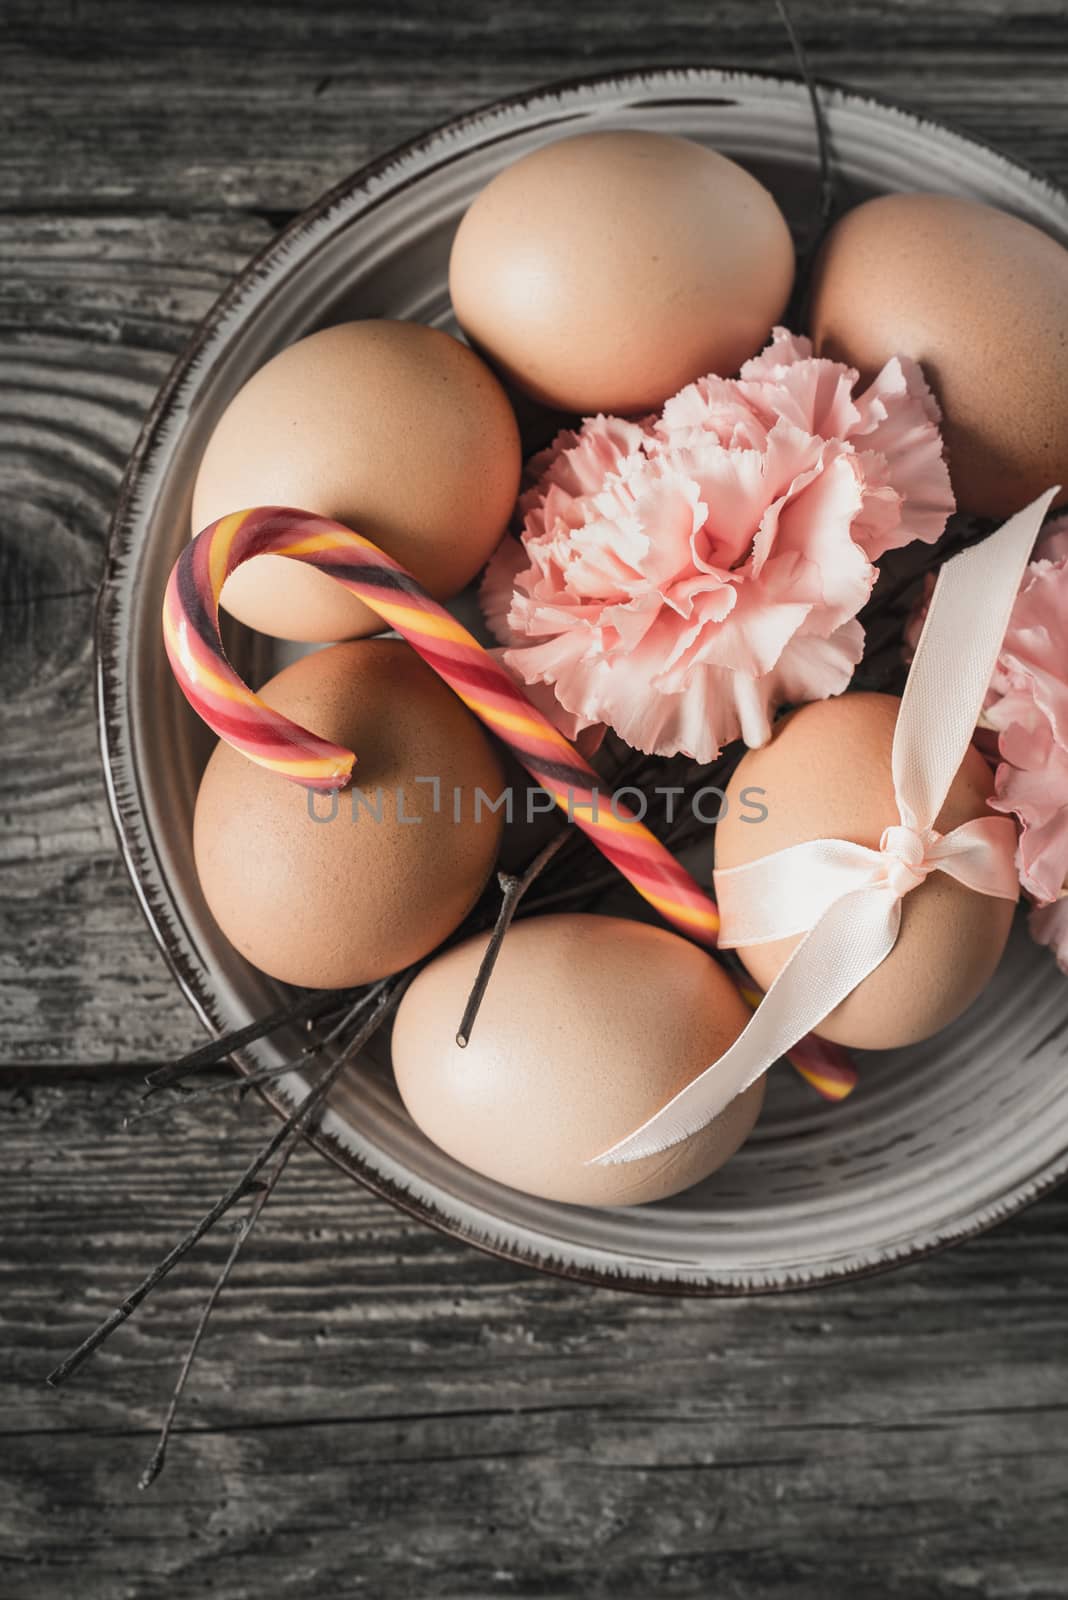 Eggs with ribbon , branches , flowers and candy on the wooden table vertical by Deniskarpenkov